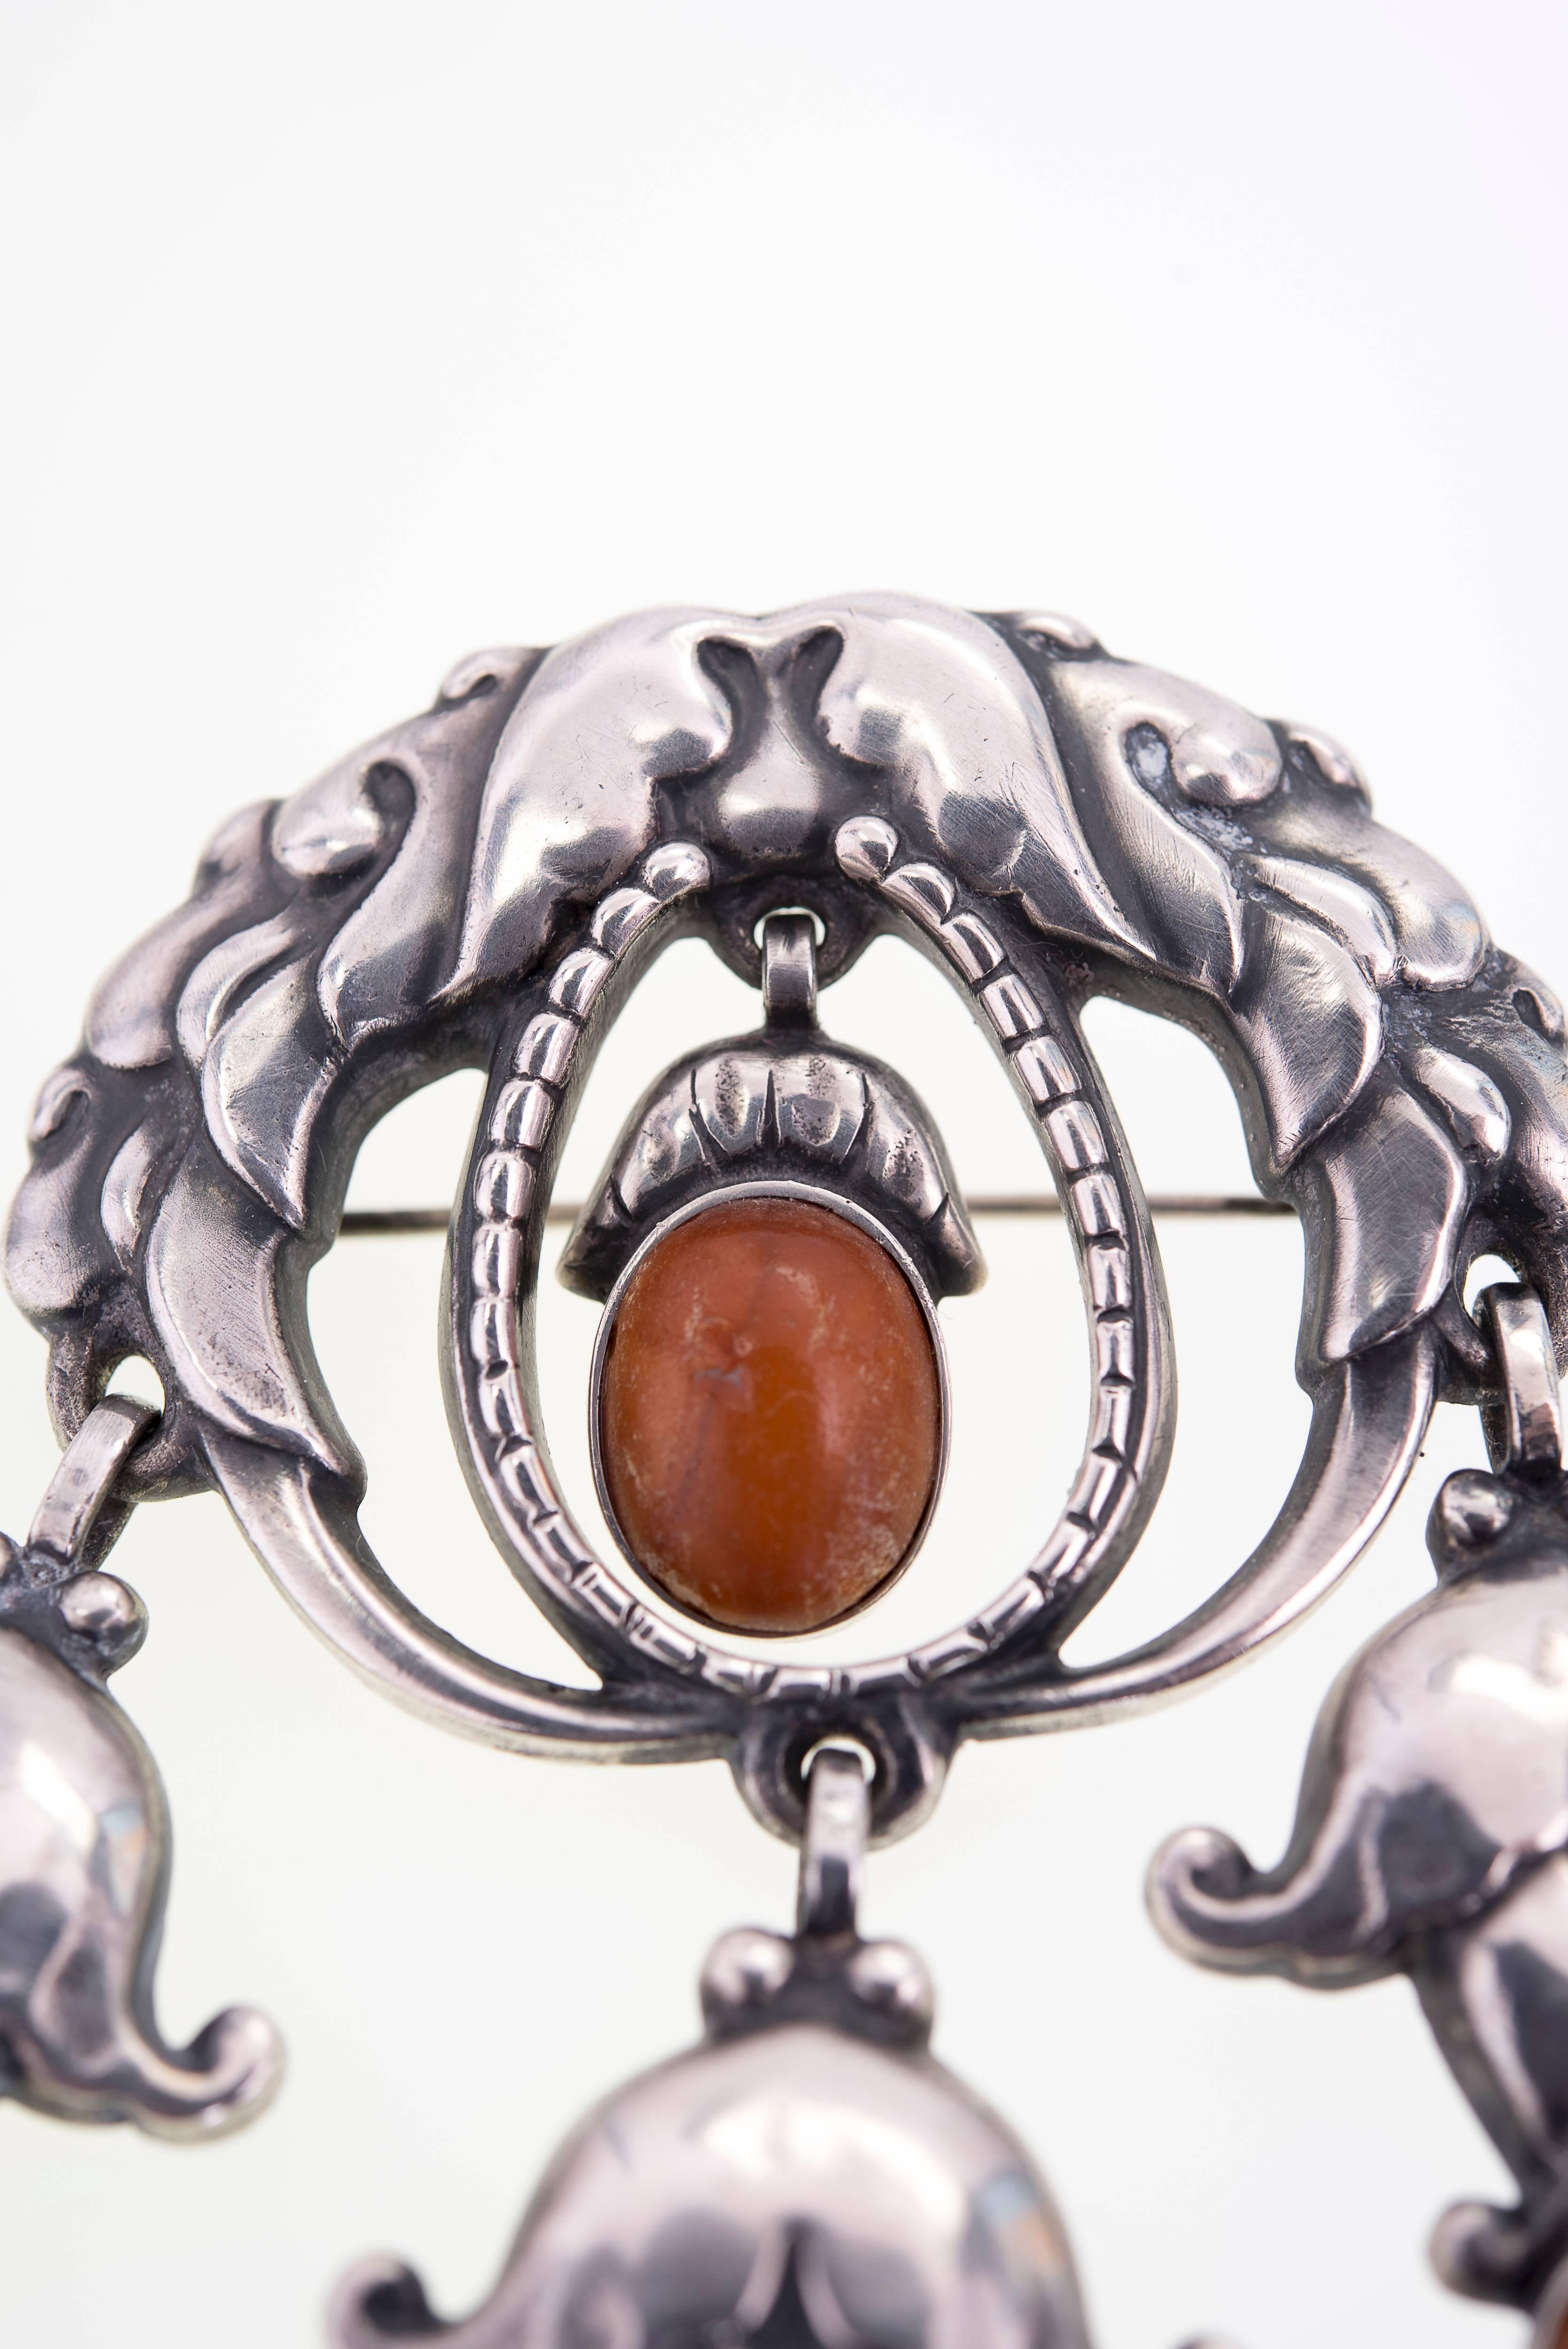 Art Nouveau Georg Jensen Rare Amber and Silver Brooch #95 For Sale